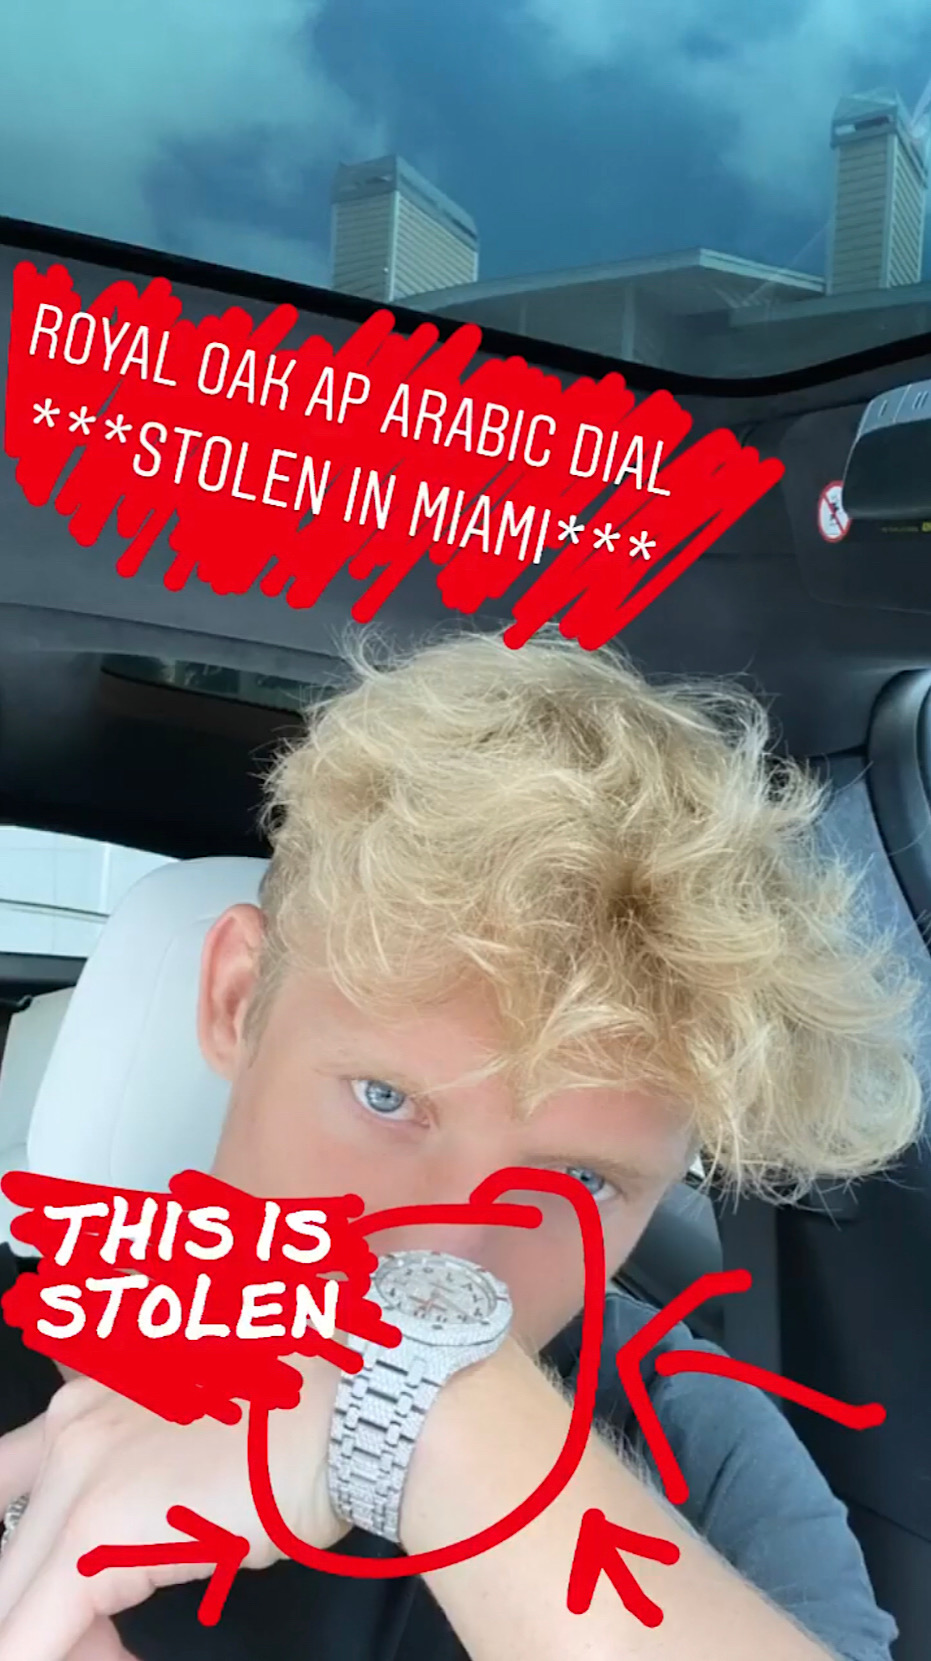 Tfue posted an Instagram Story saying his Royal Oak AP Arabic Dial watch had been stolen (Instagram - @tfue)